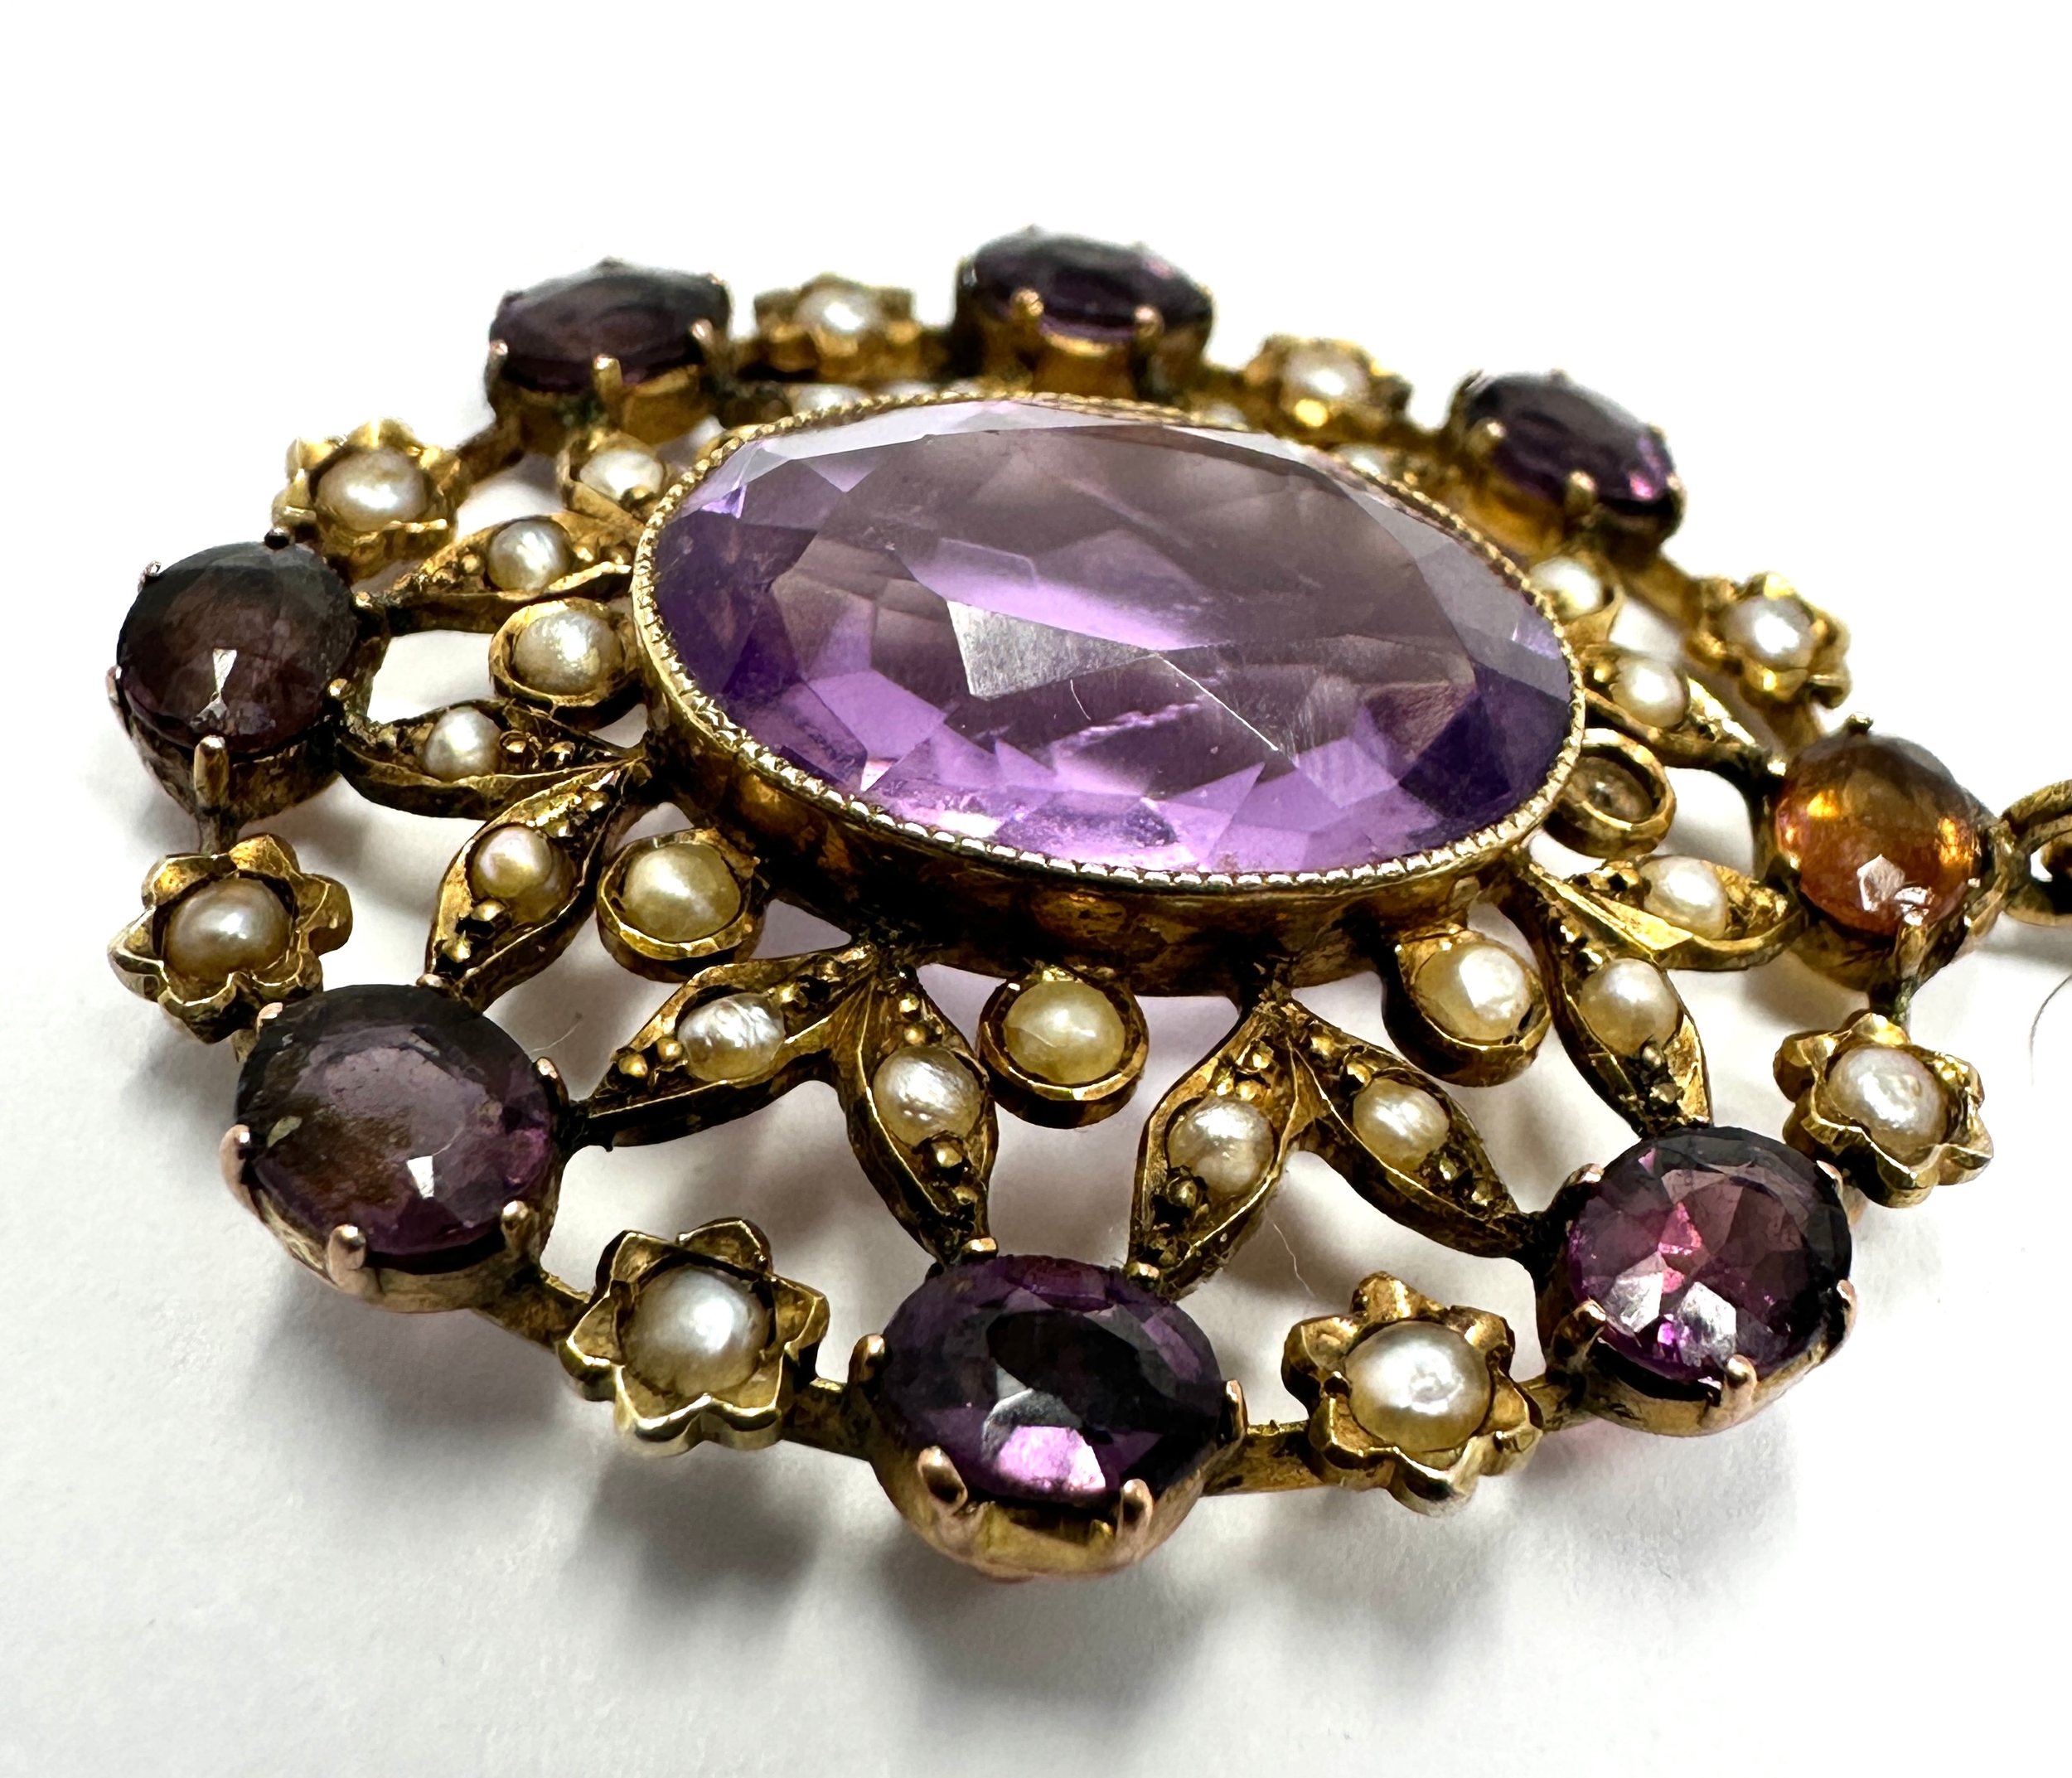 Antique gold amethyst & seed-pearl pendant measures approx 5cm drop by 3cm wide weight 7.4g - Image 3 of 5